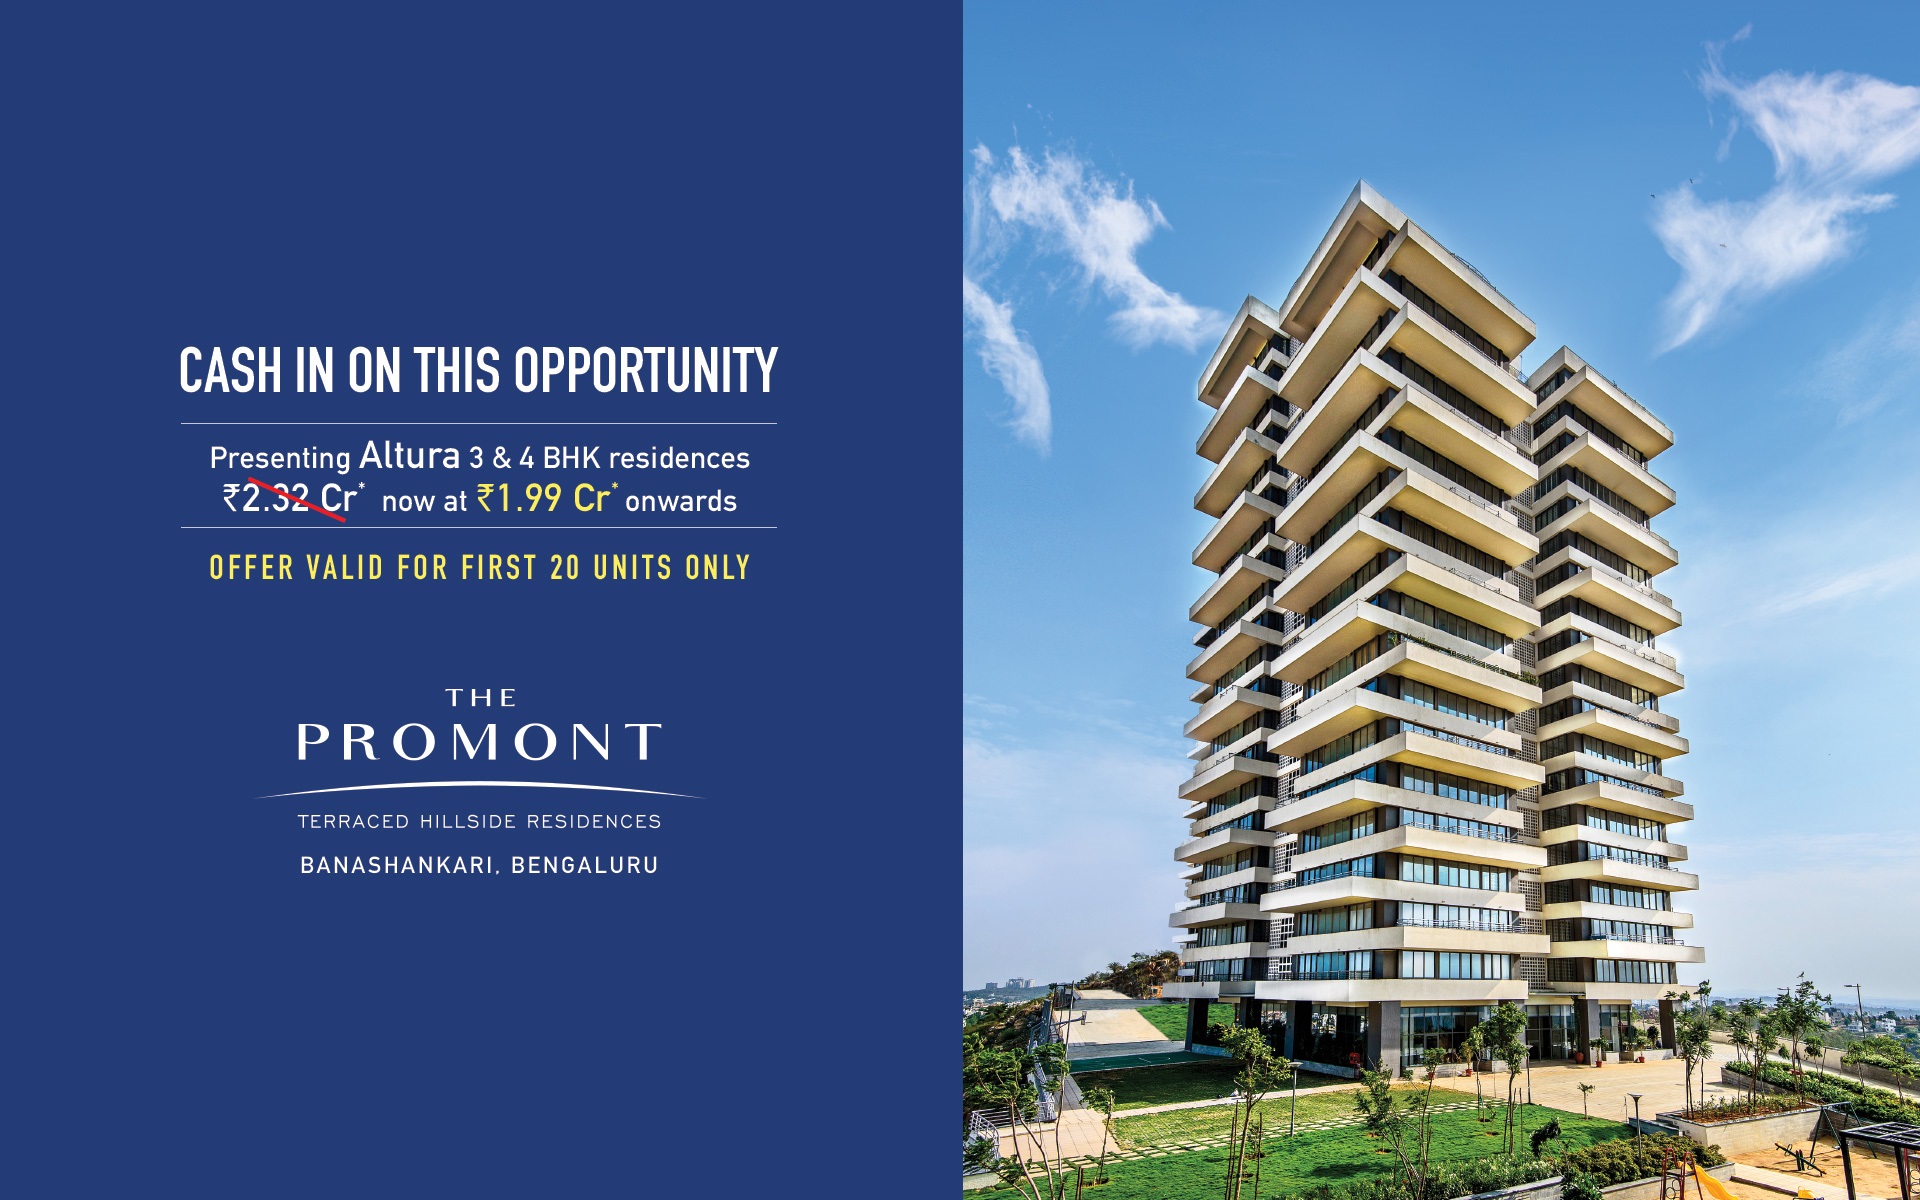 Presenting altura 3 & 4 bhk residences now at Rs. 1.99 Cr. at Tata The Promont in Bangalore Update